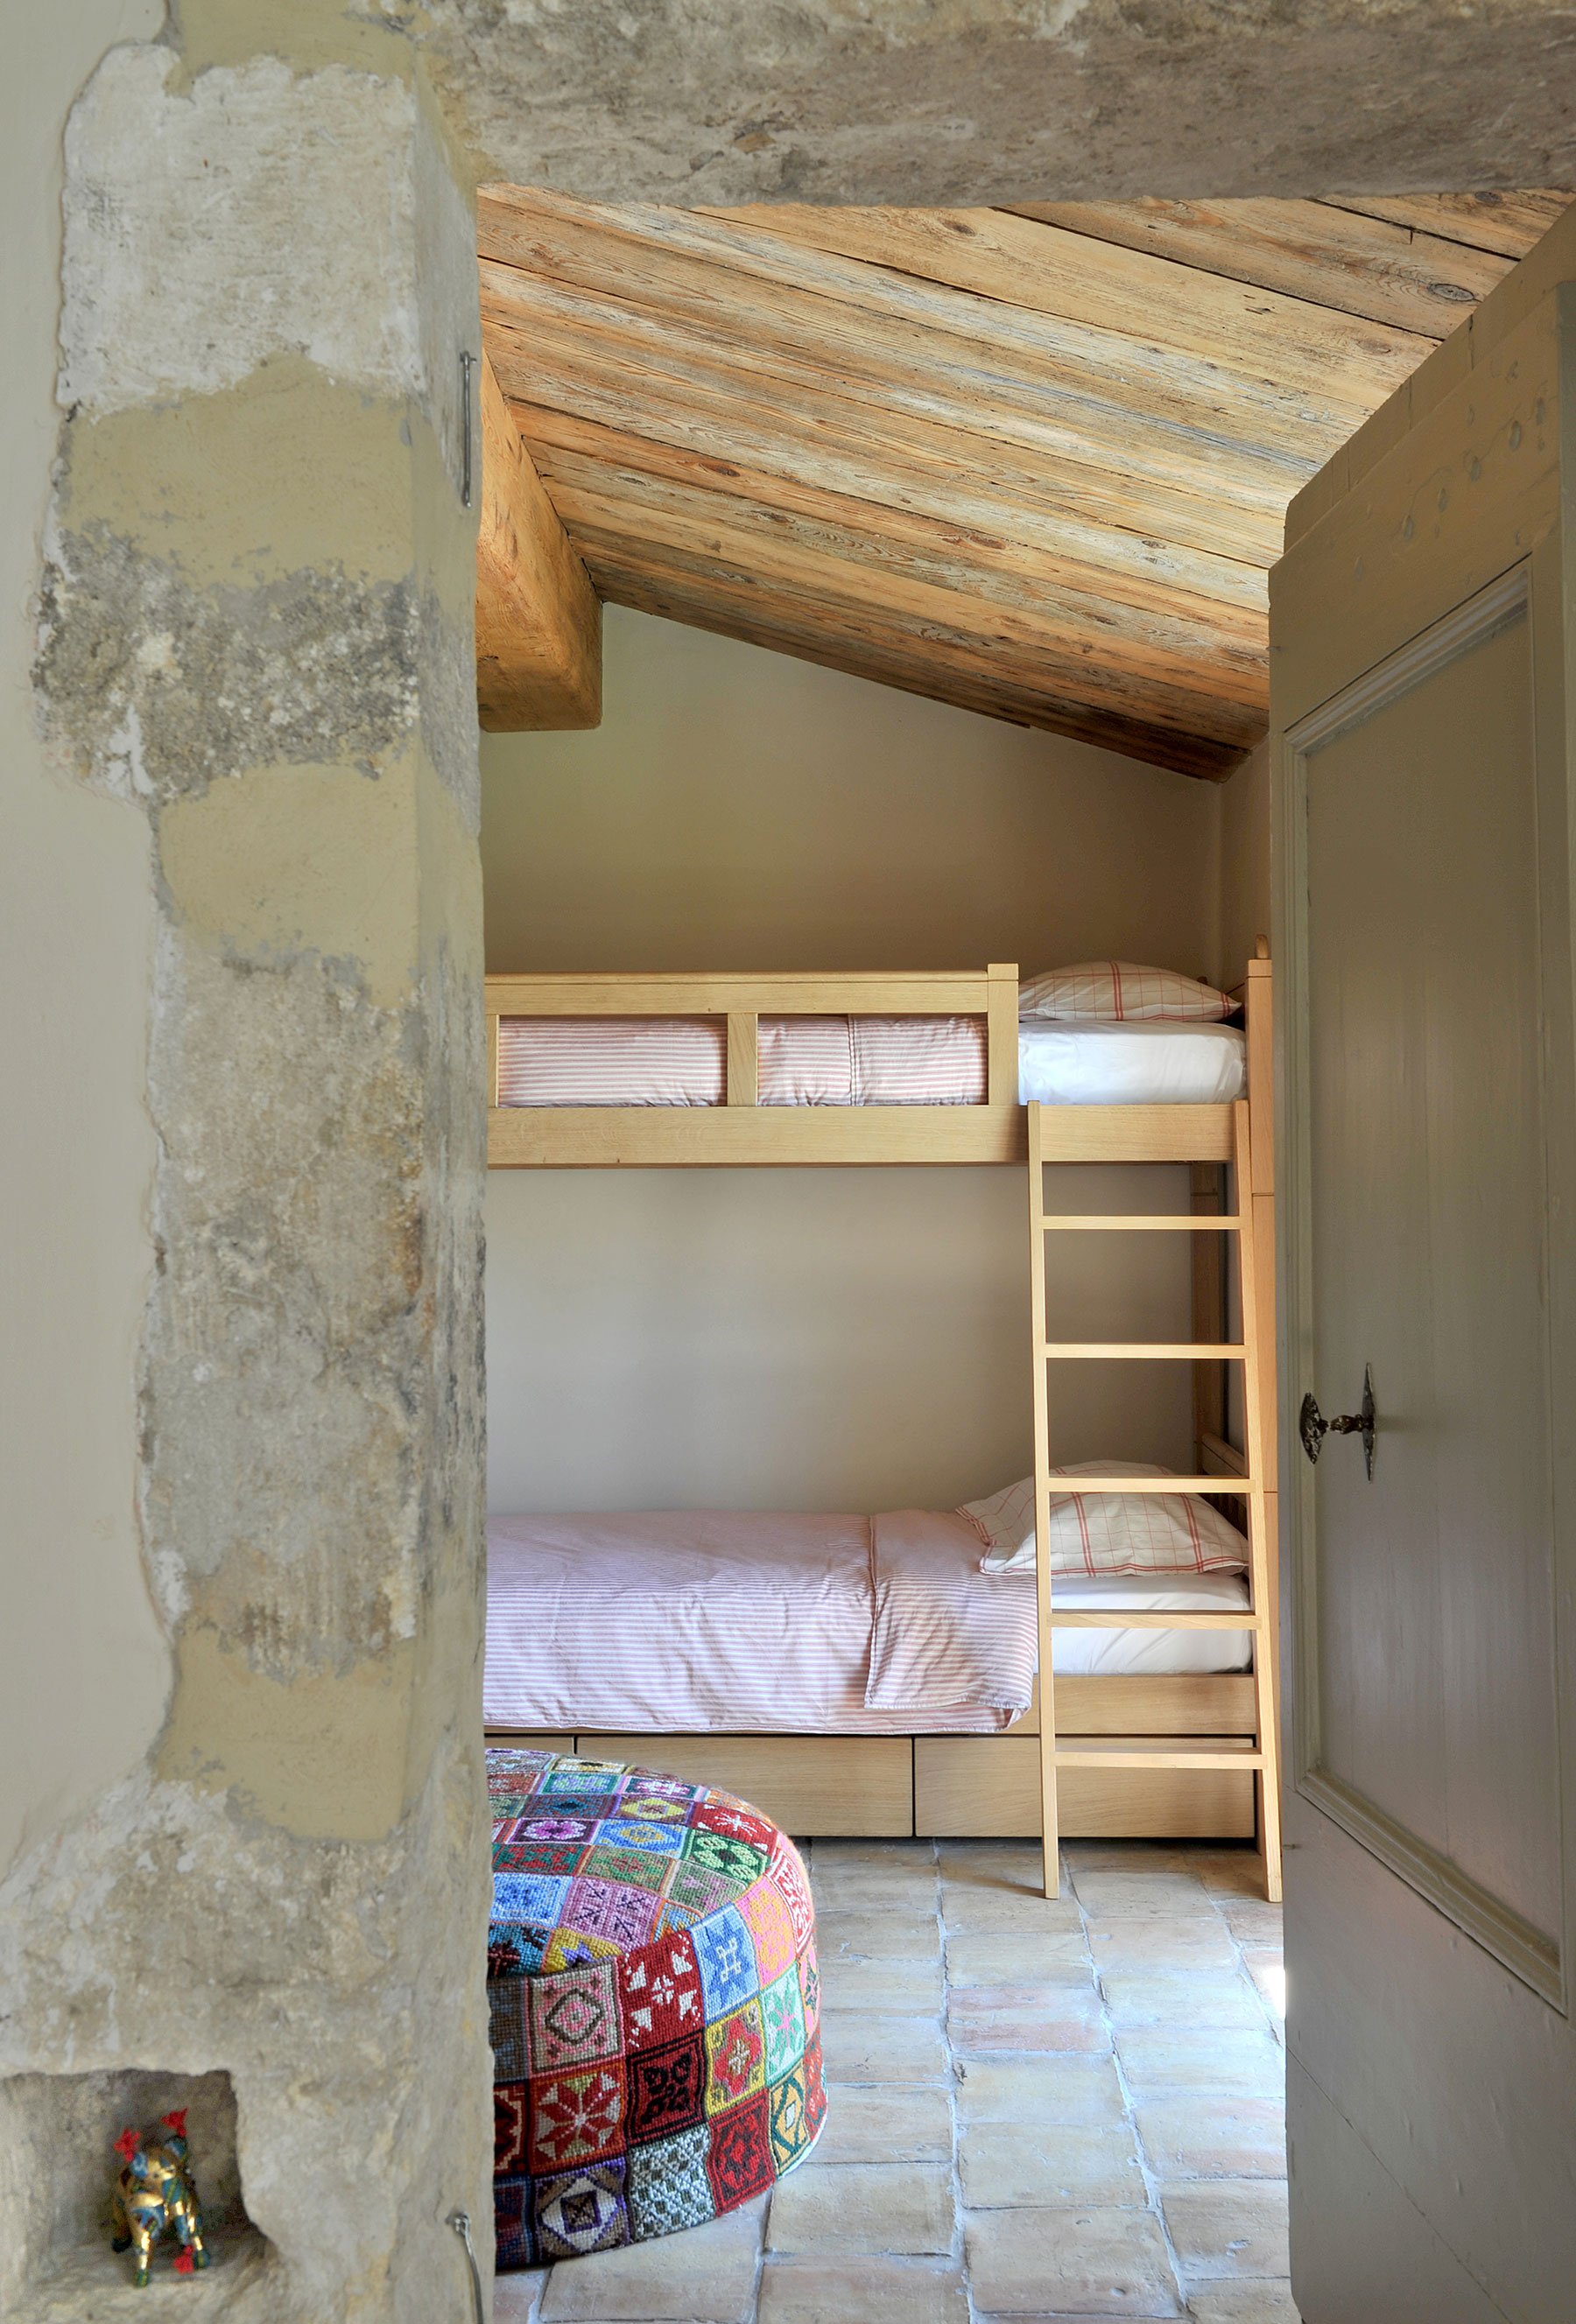 34   New bespoke bunk beds for the children